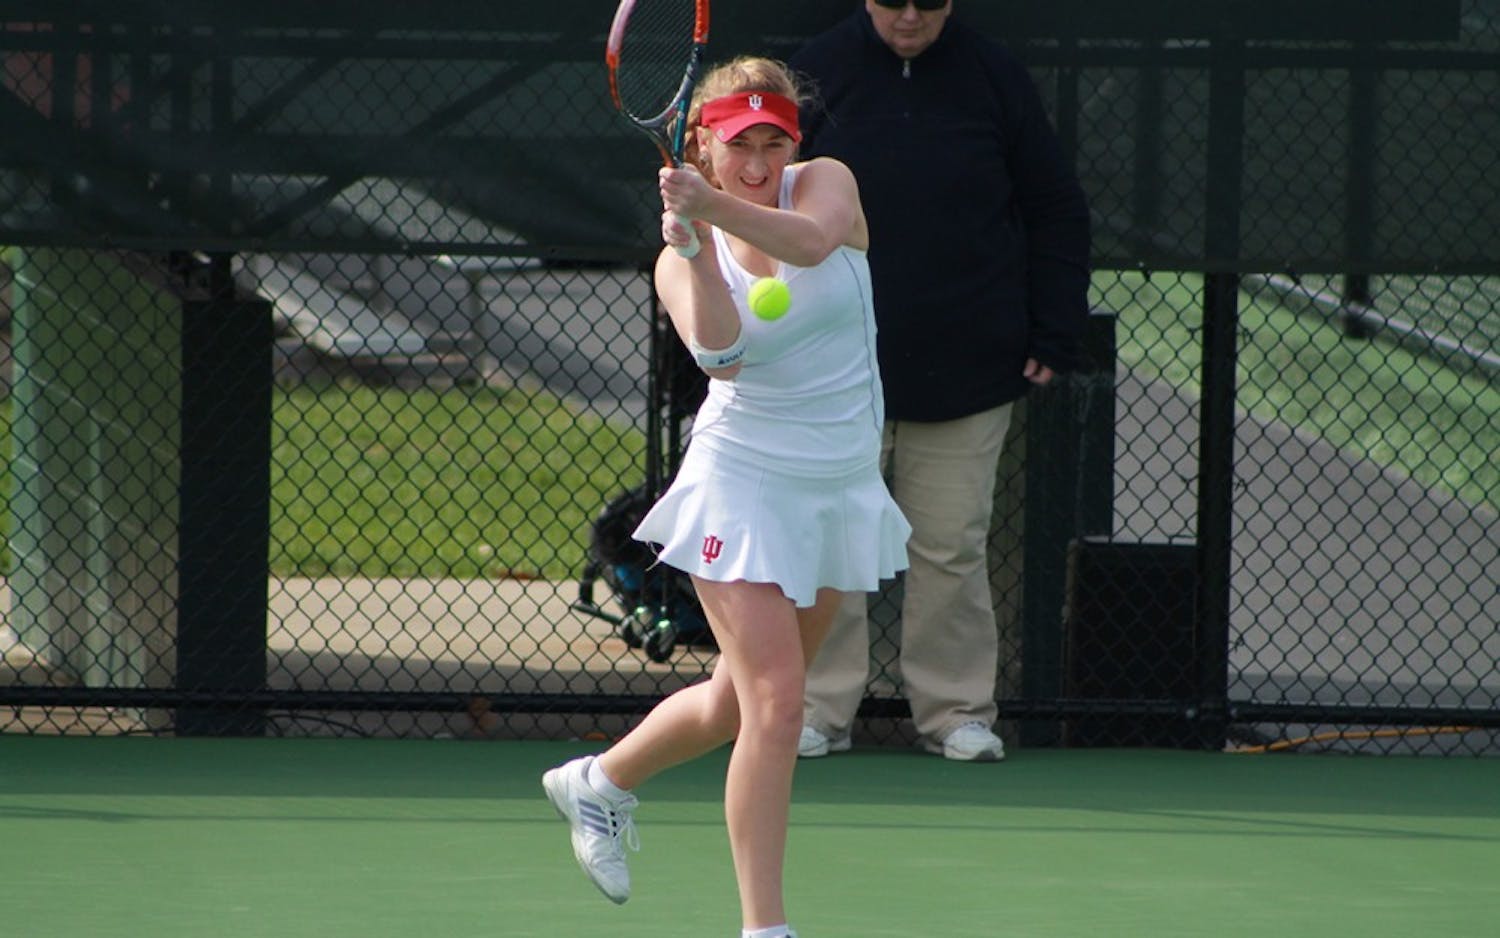 Senior Kim Schmider waits for the ball in a doubles match last Sunday morning. The Hoosiers fell to the Golden Eagles, 4-2.